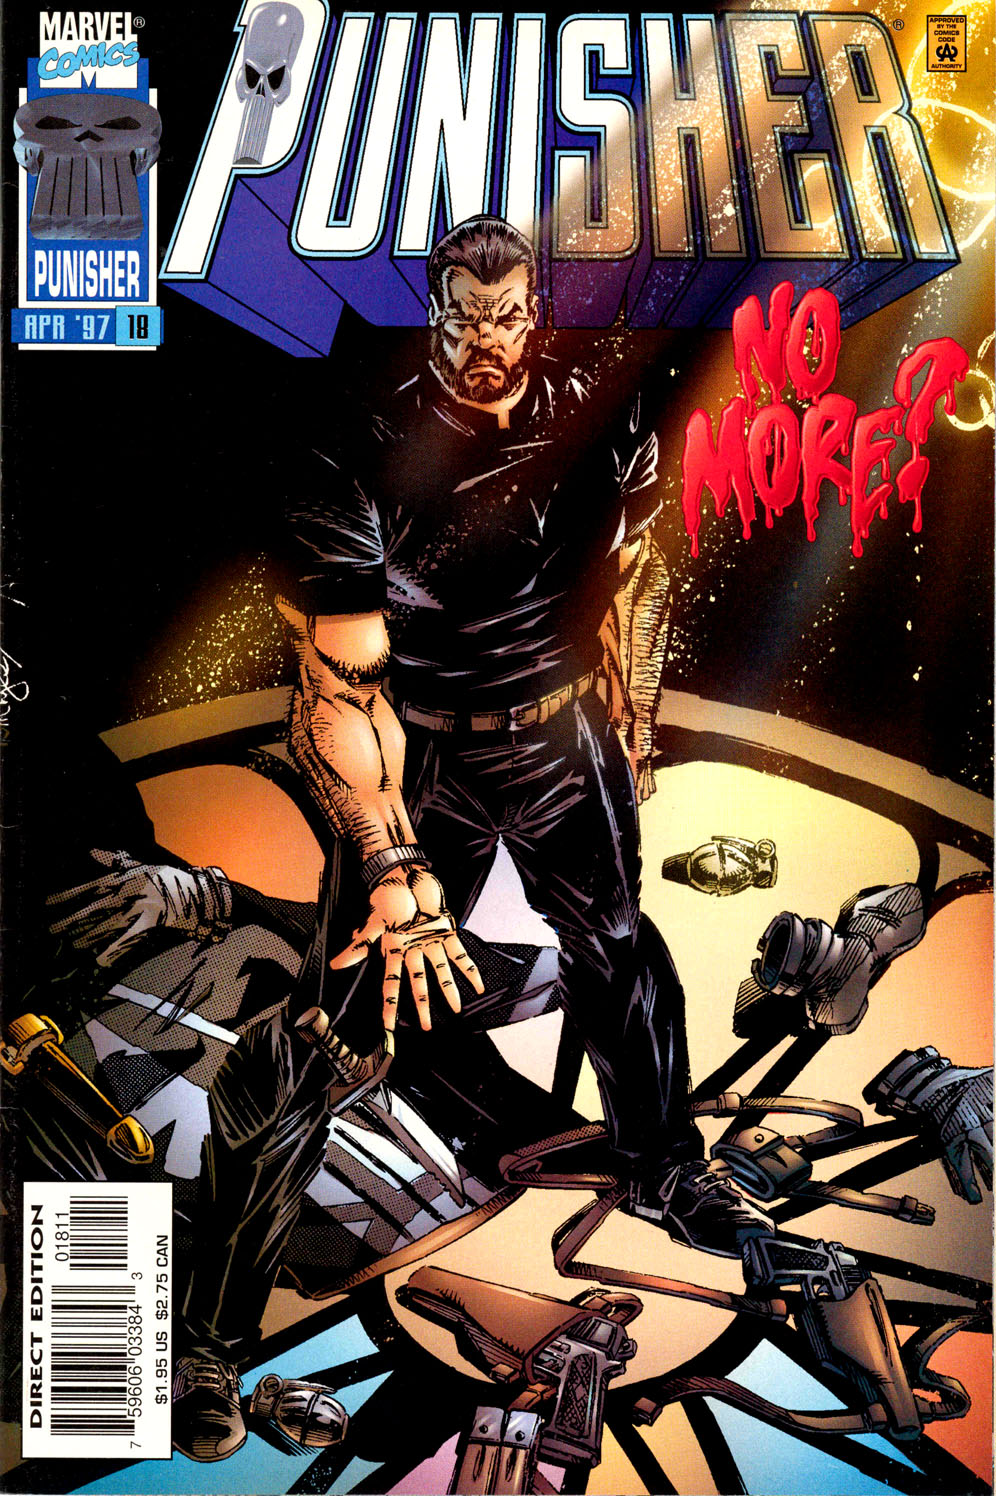 Punisher (1995) Issue #18 - Double Cross #18 - English 1